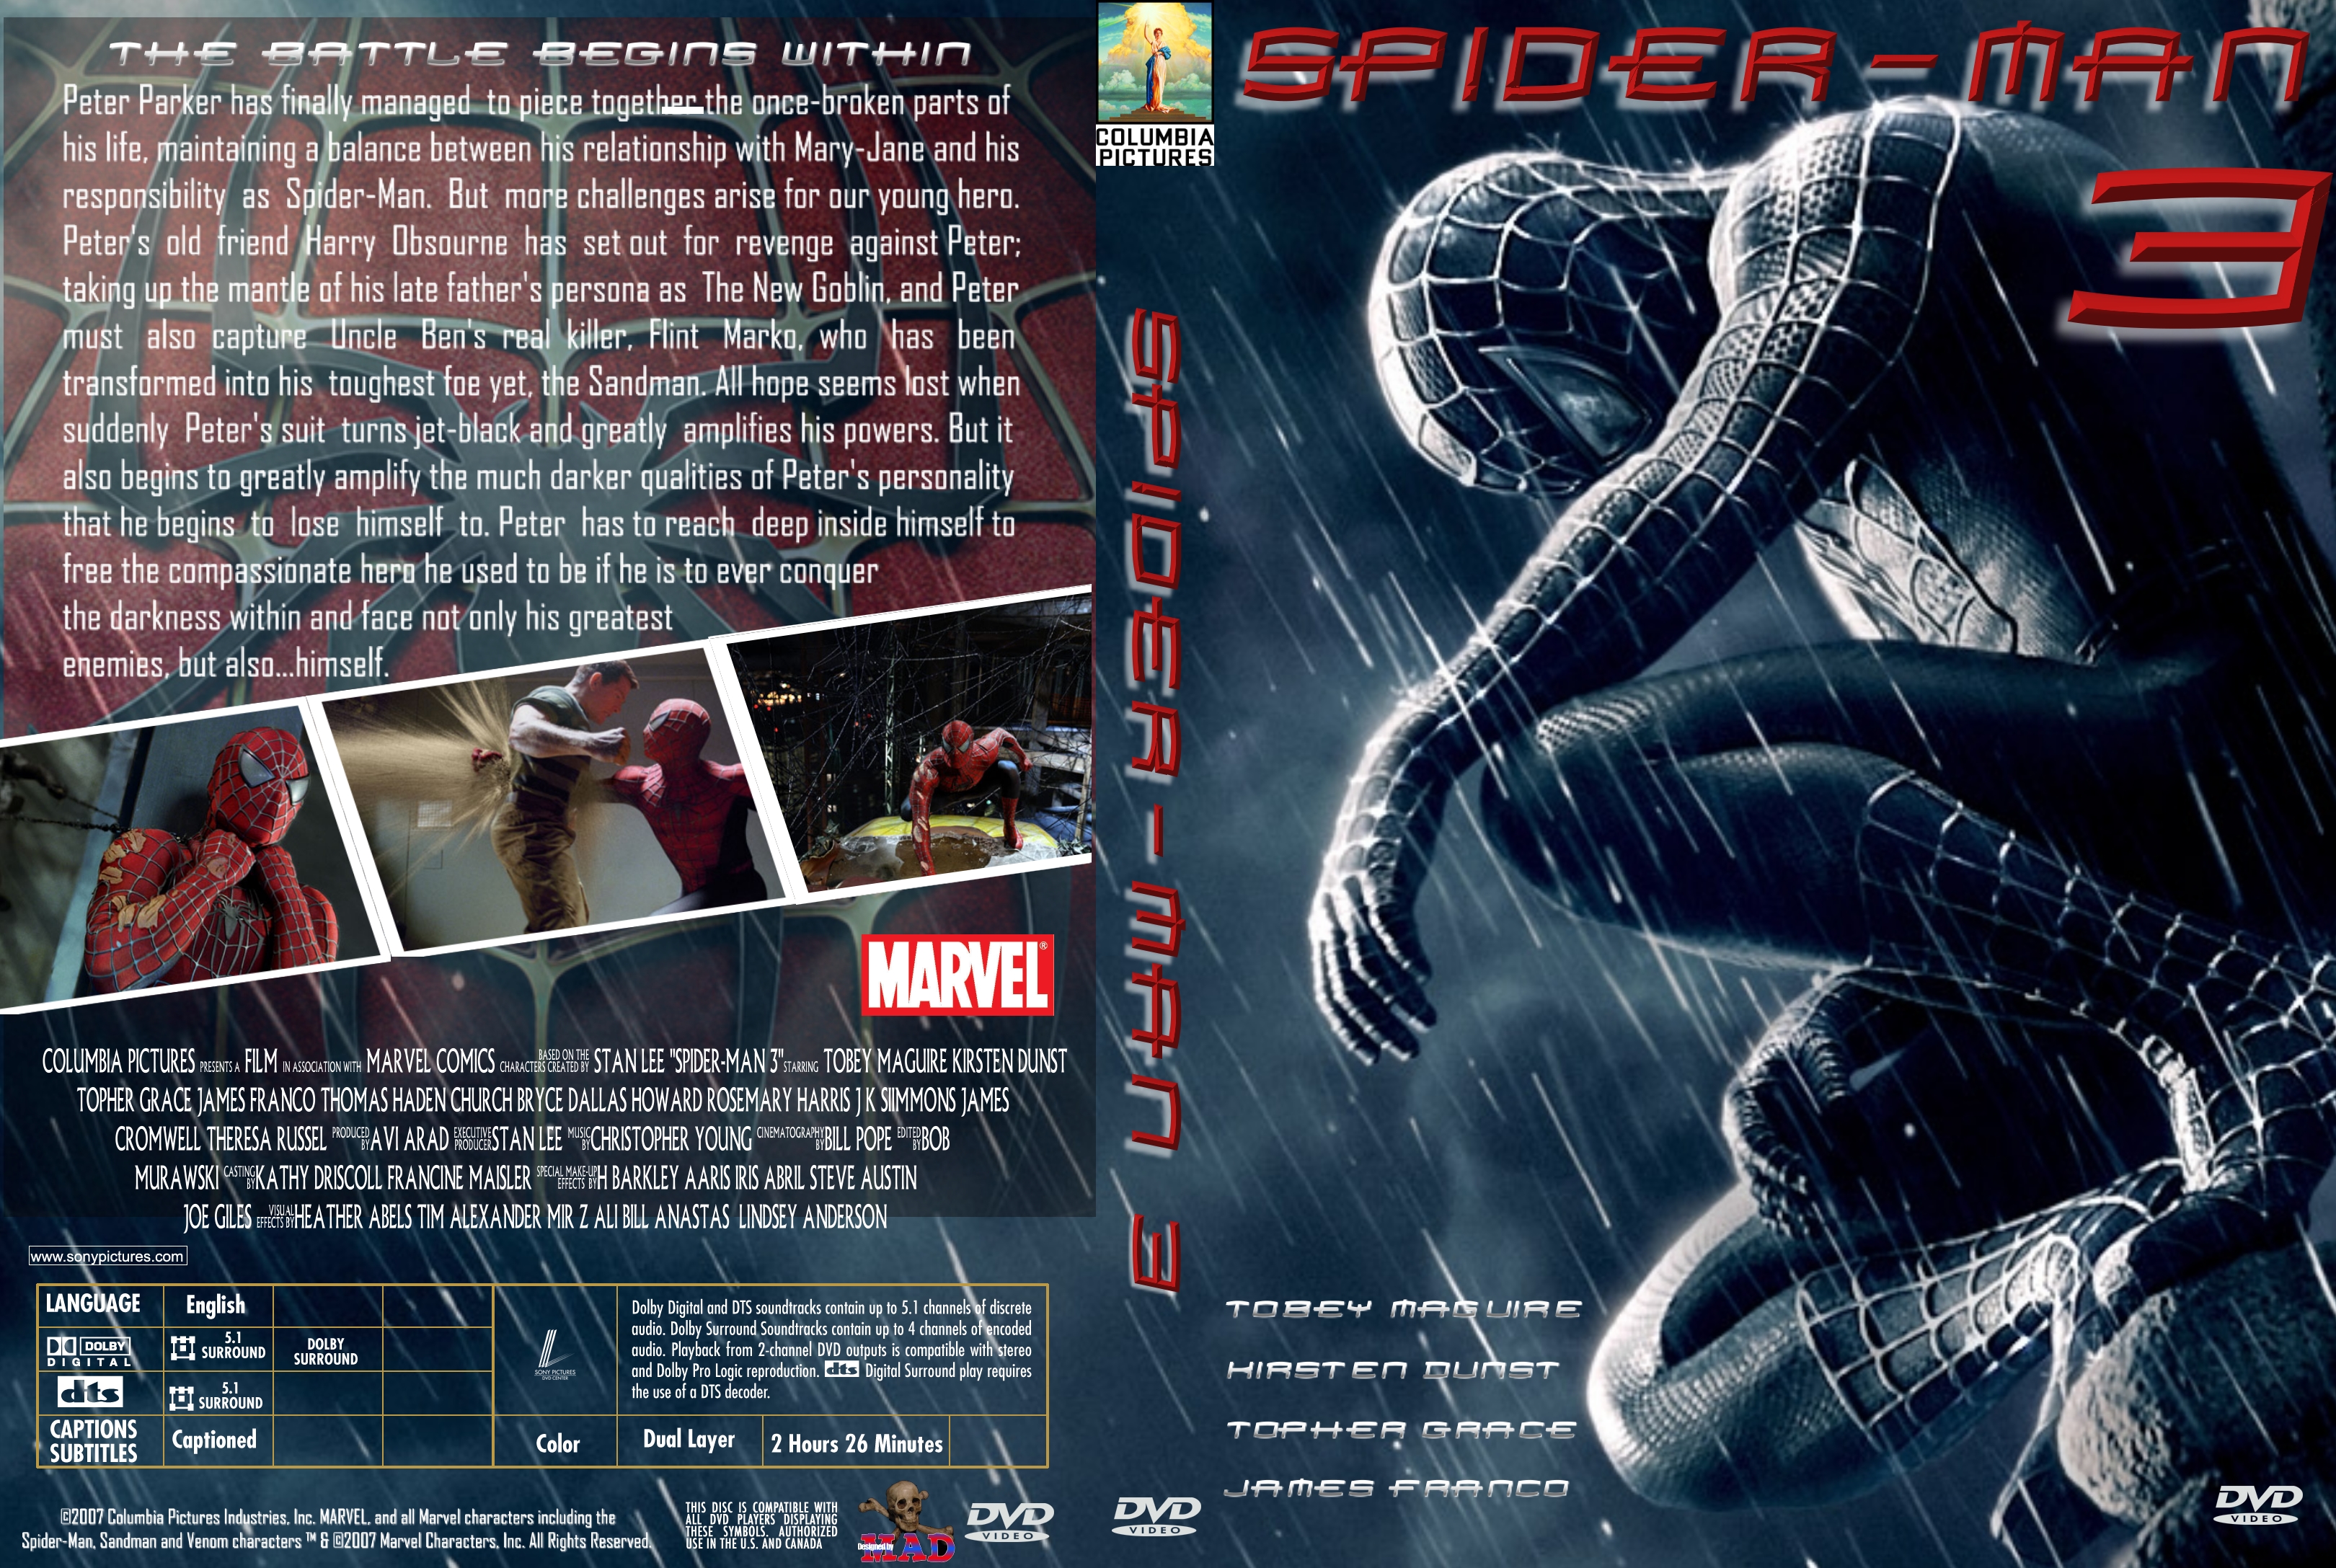 spiderman 3 dvd cover + label - front back.